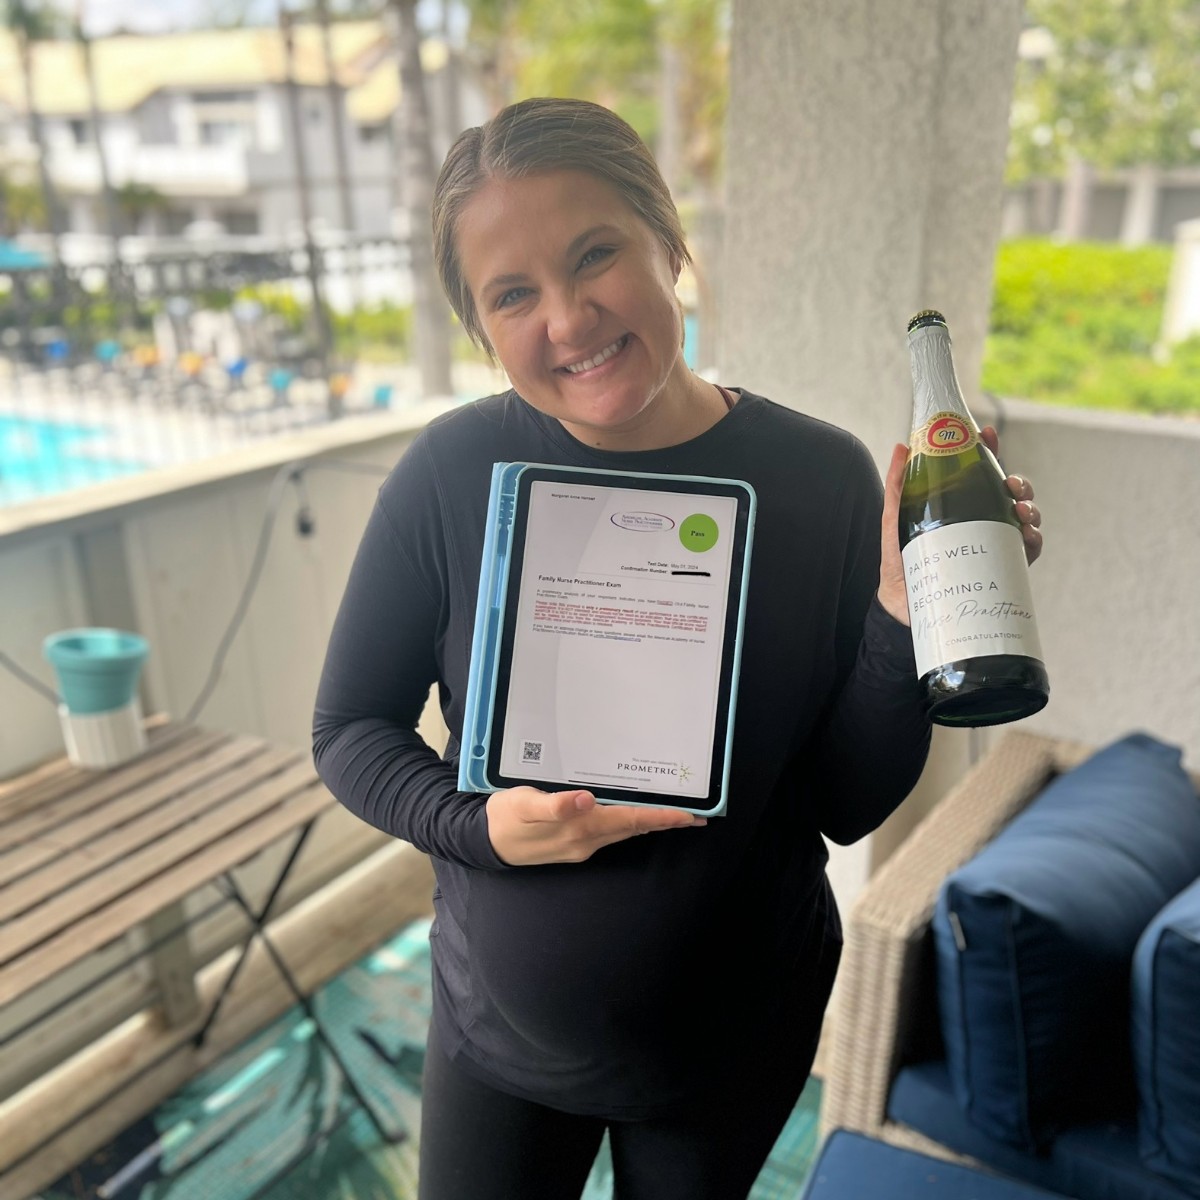 Help us celebrate Margaret's achievement! This MSN-FNP grad officially passed her AANP Board Certification Exam and is officially an NP! 🥳🩺 #HUPossible #MSN #MSNFNP #NP #NursePractitioner #MastersDegree #College #University #Congrats